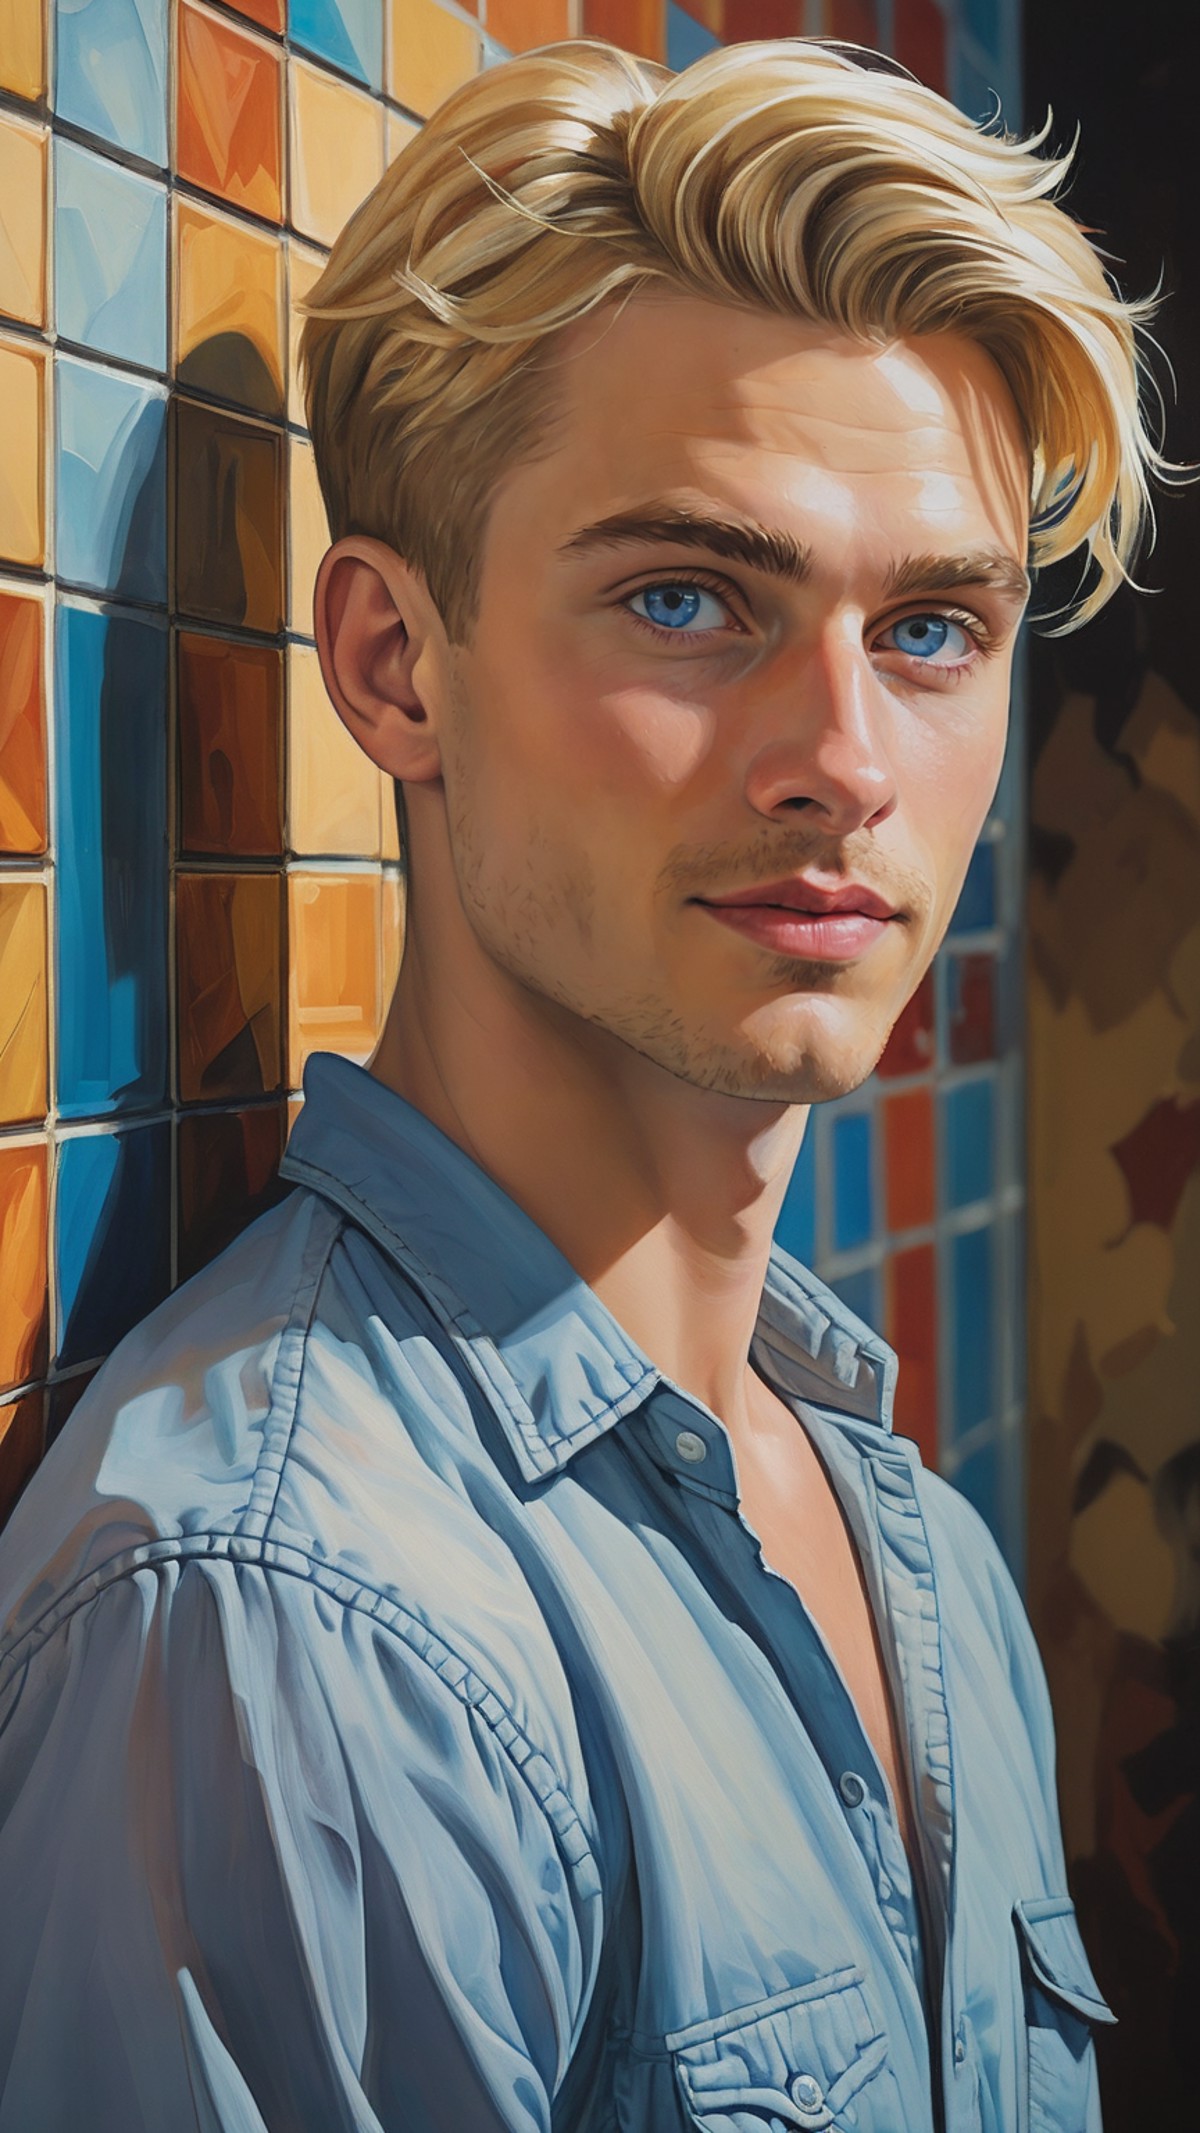 vivid oil painting, young man, guy leaning against a tiled wall, looking at viewer, he has very short blonde hair with a f...